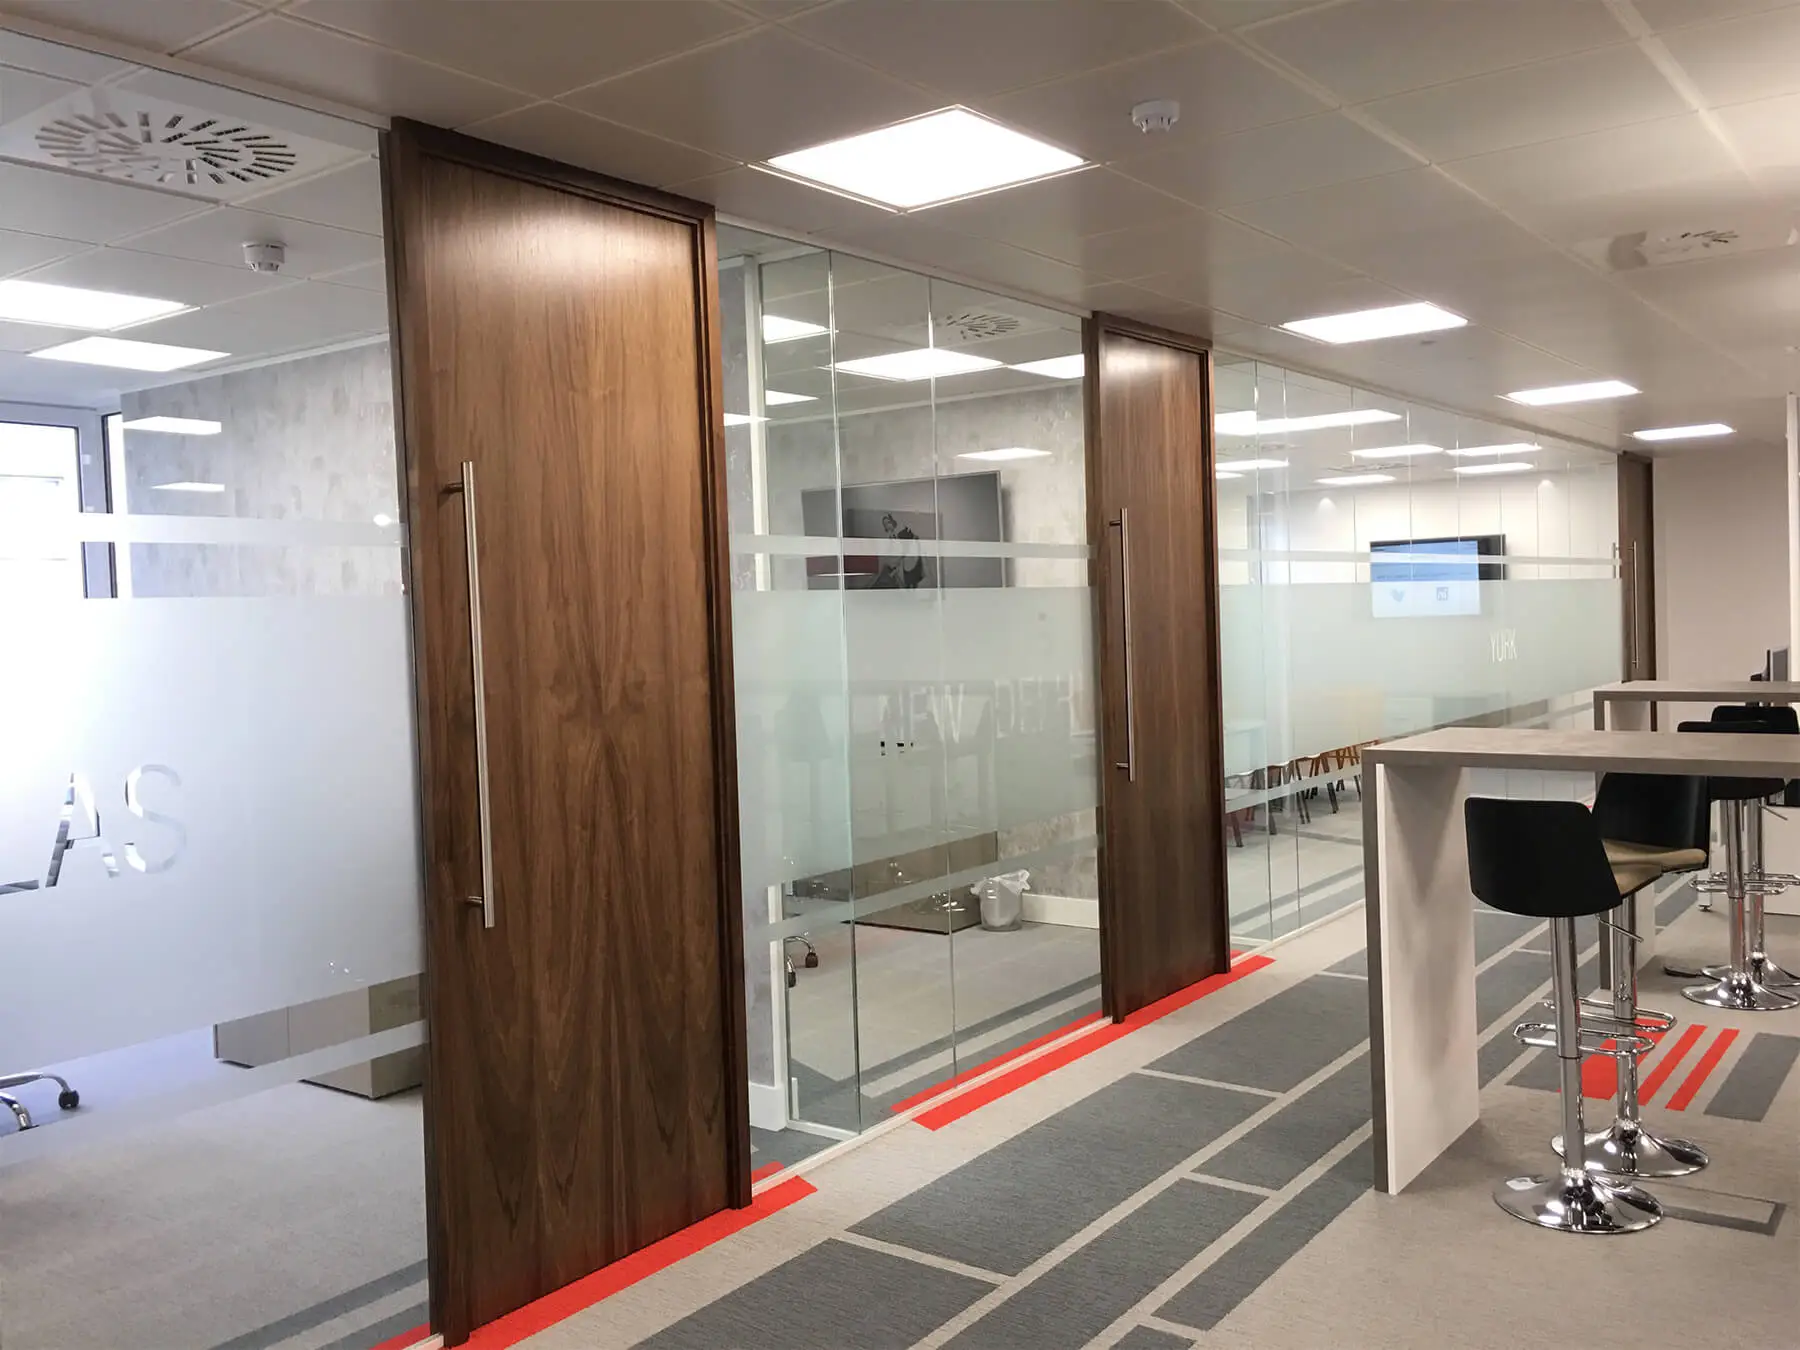 Office space divided with single glaze partitions with solid doors